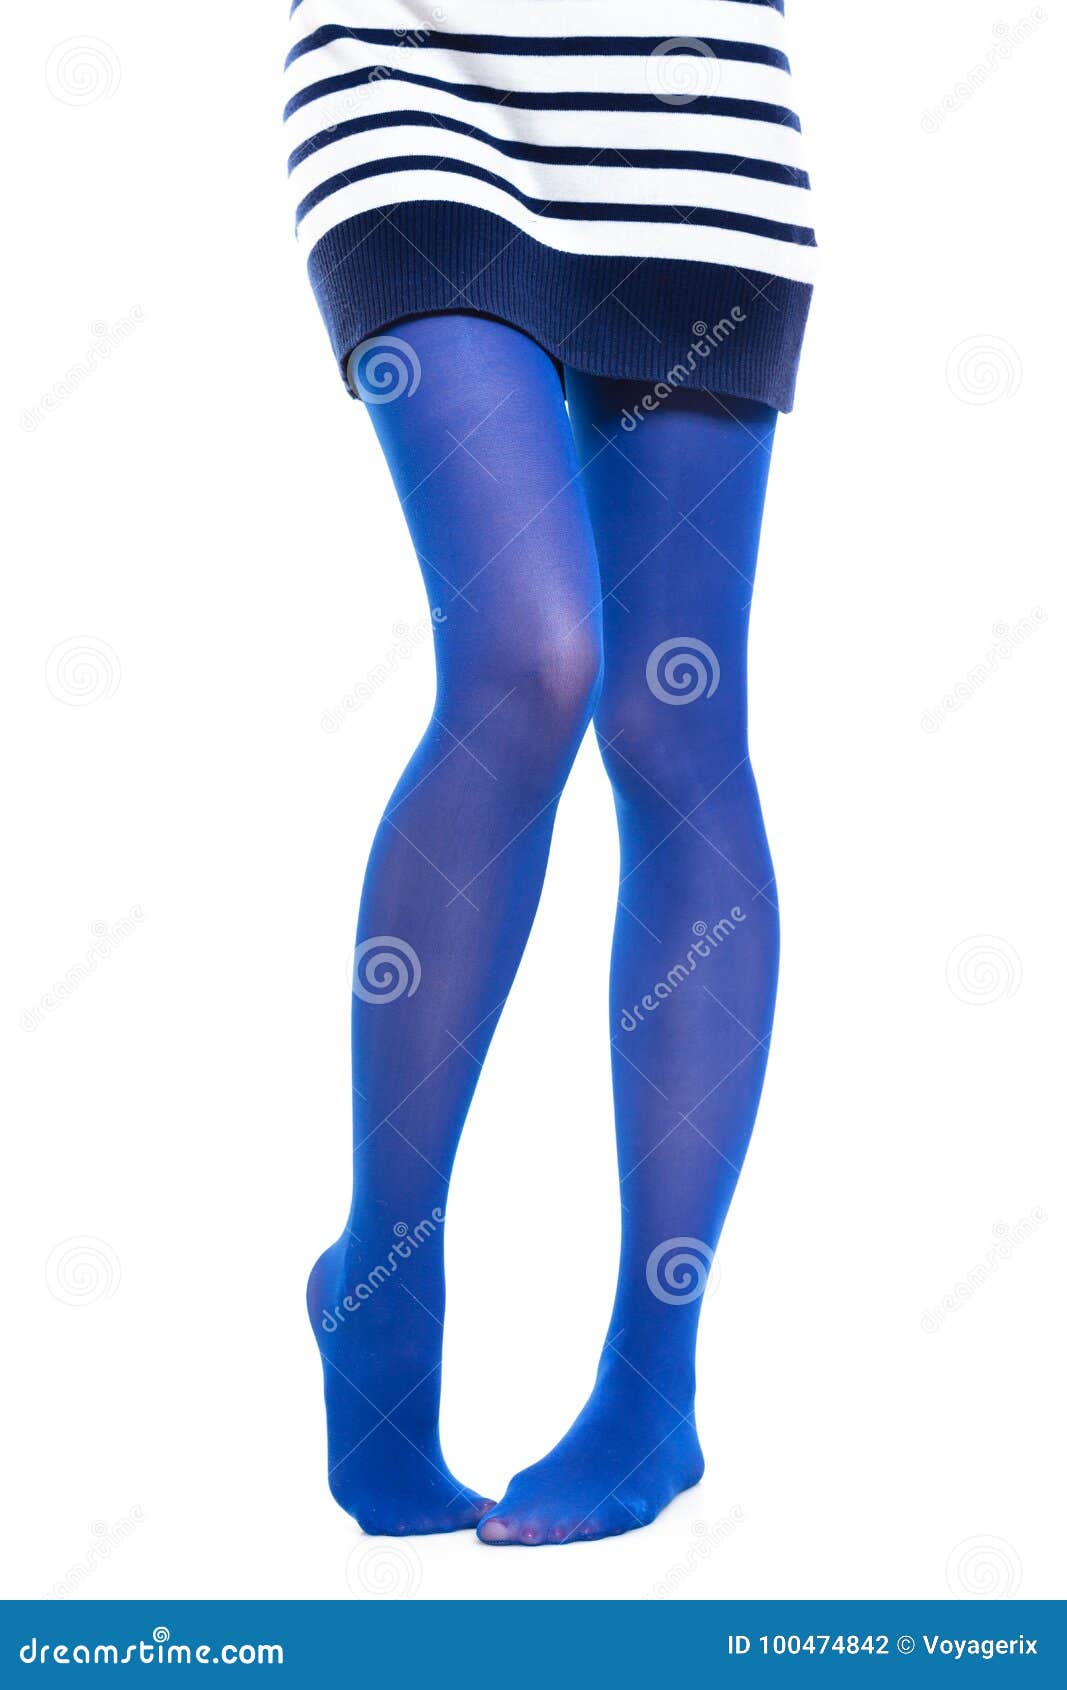 Tights and Leggings  Pantyhose outfits, Blue tights, Colored